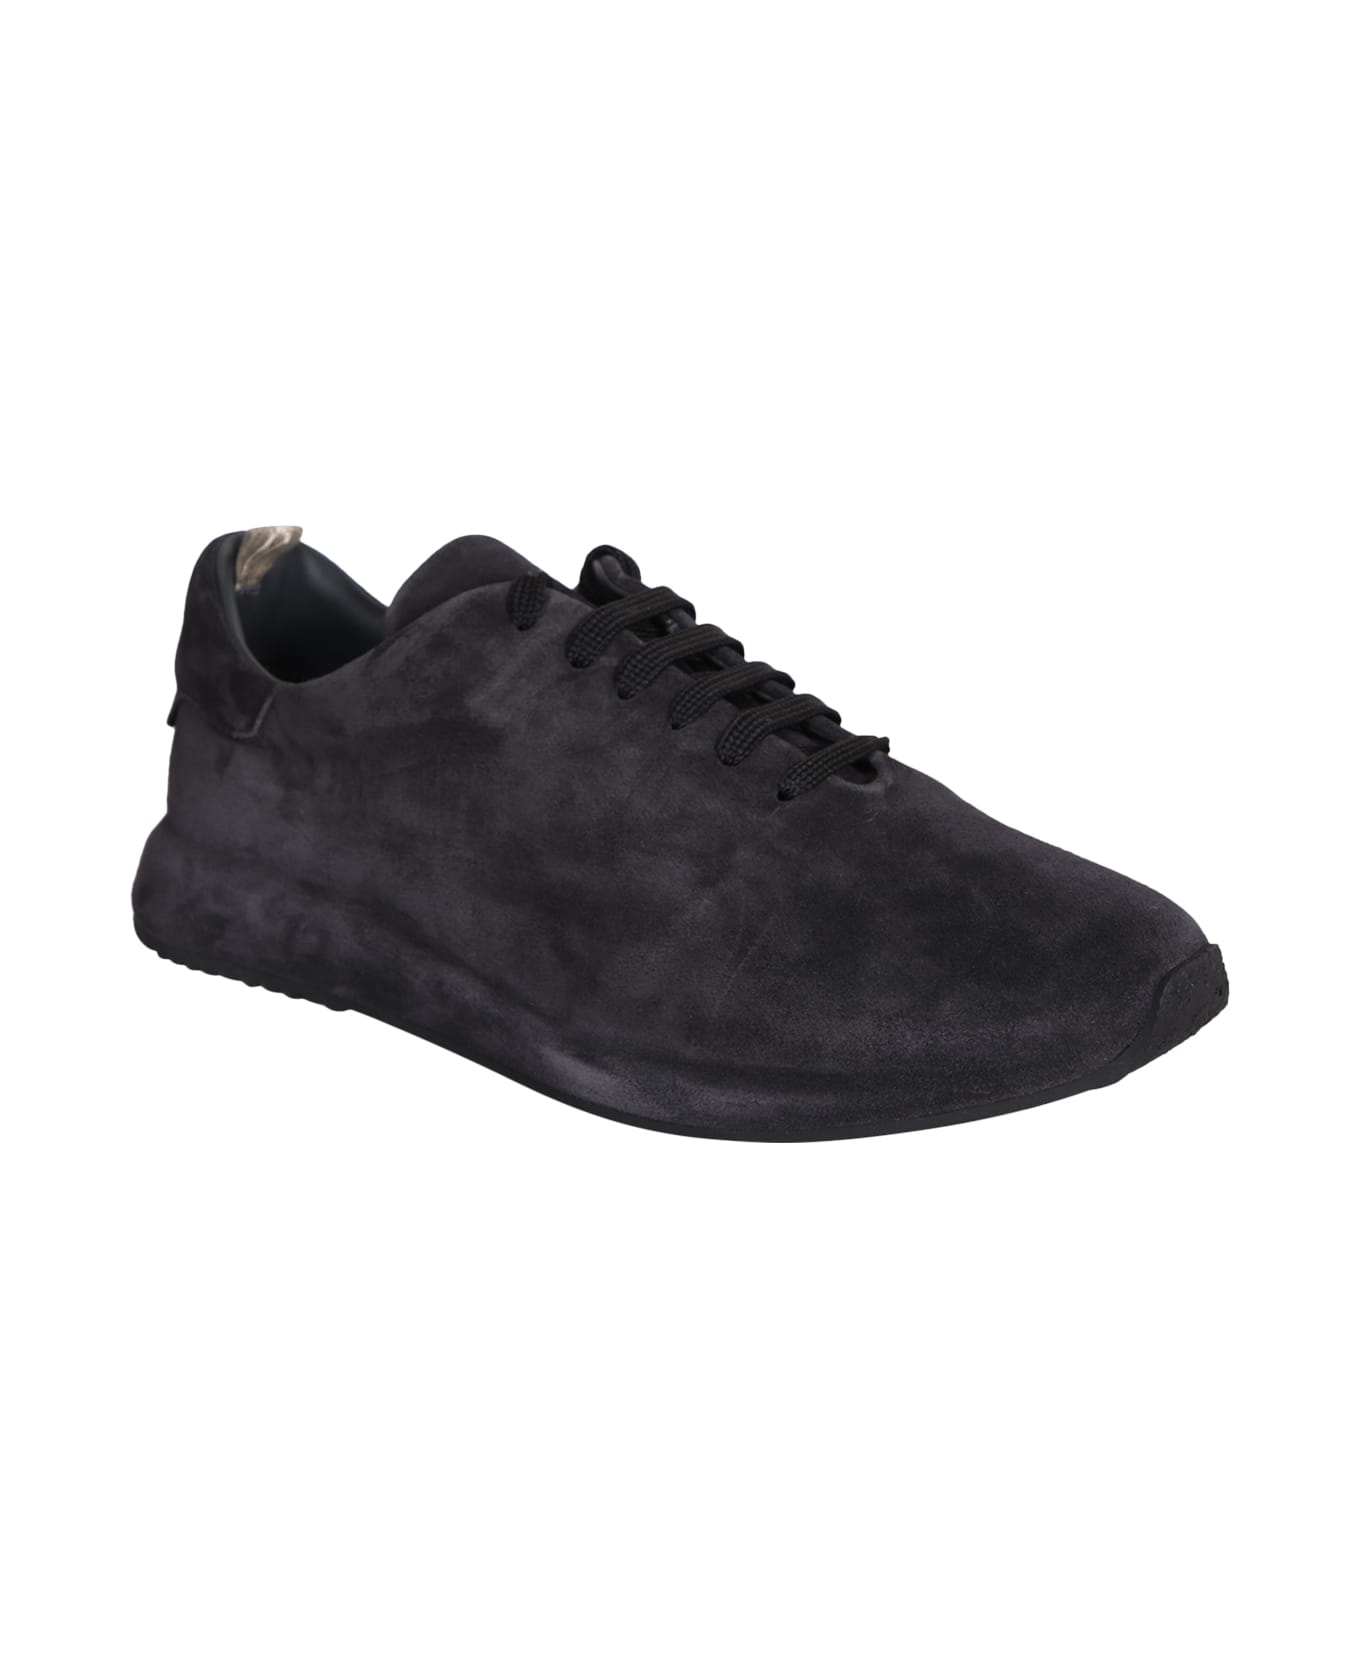 Officine Creative Race Sneakers By Officine Creative With A Contemporary Design - Black